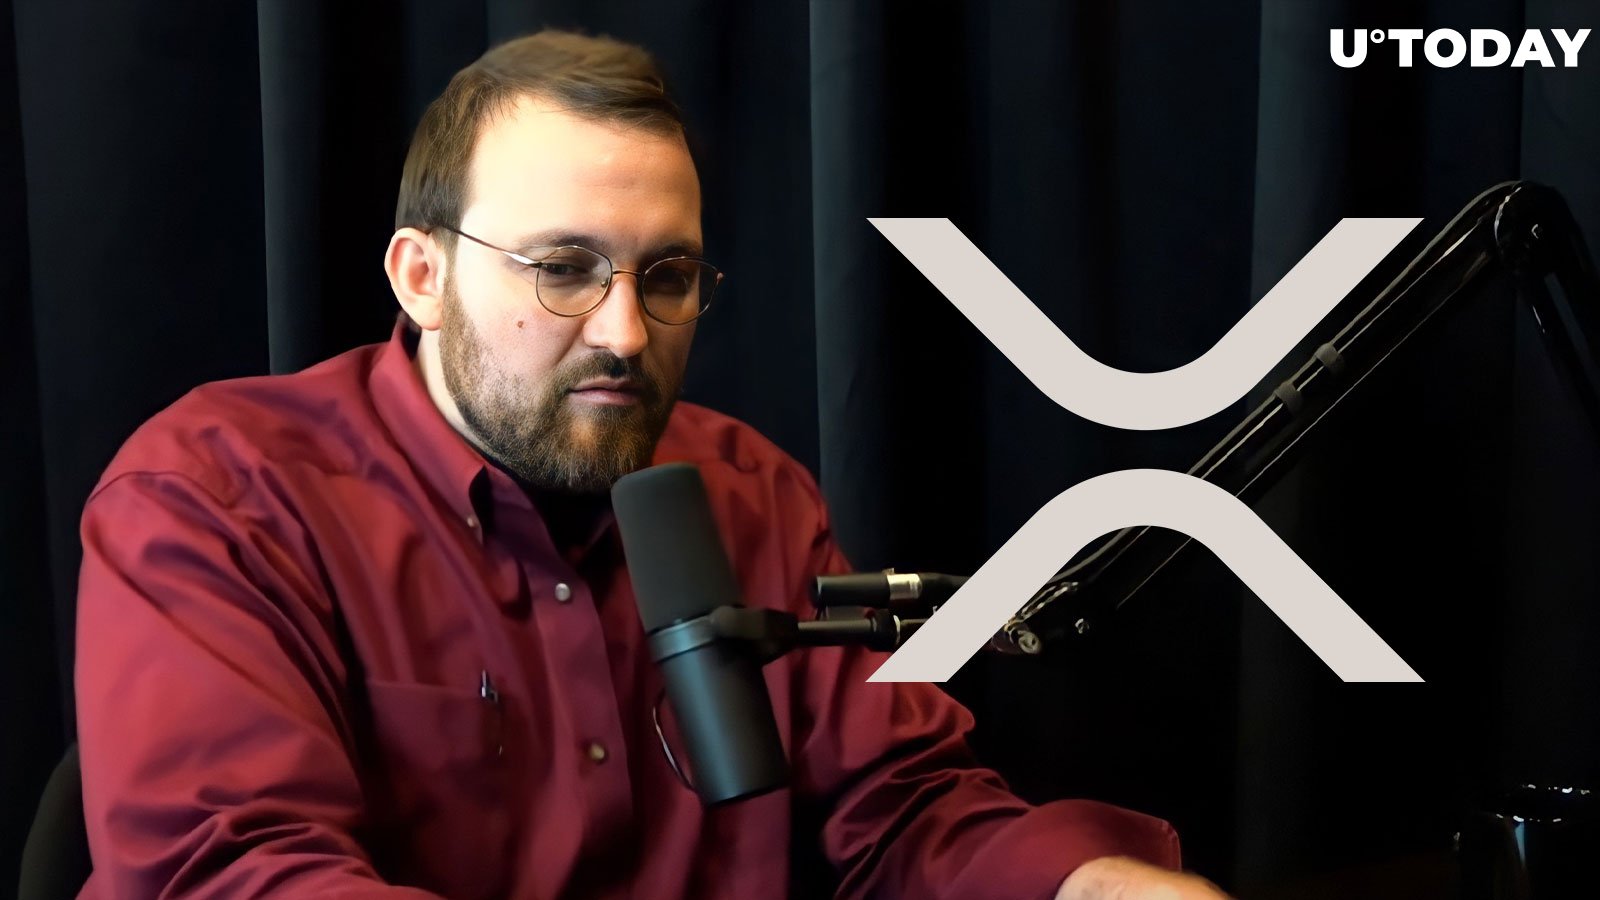 “Sad and Shameful”: Cardano Founder Slams XRP Community for Spreading Conspiracies About Him